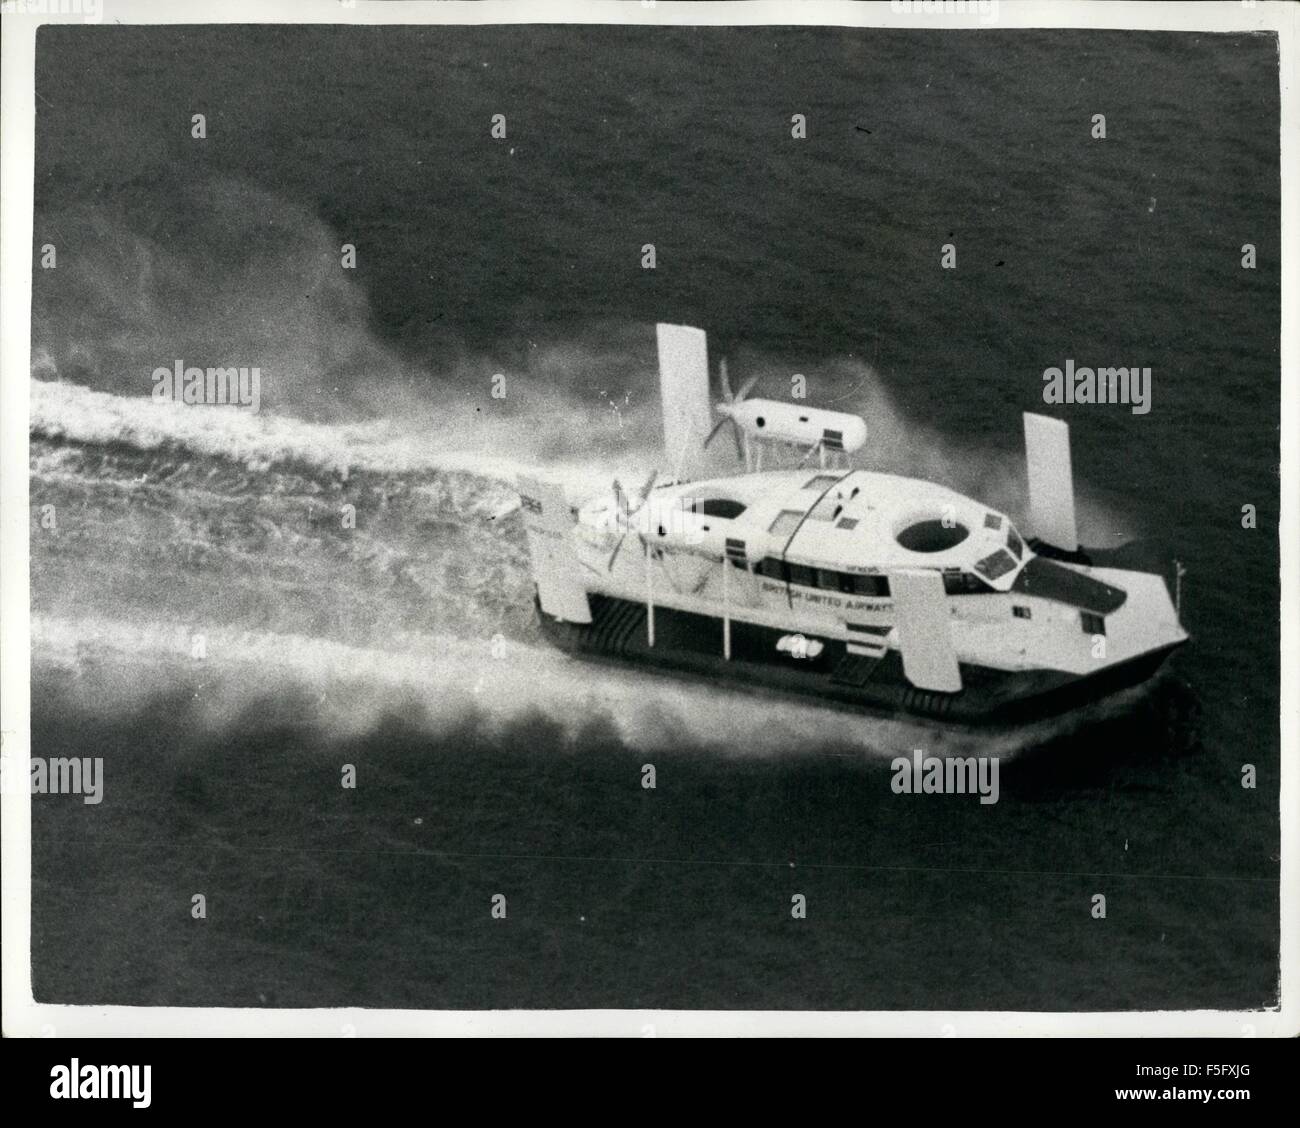 1972 - THE ''FLYING CRAB'' HOVERCRAFT BEGINS PASSENGER SERVICE: History was made yesterday in the Irish Sea by the 11-ton 24-seater Vickers-Armstrong VA 3 Hovercraft which completed a 19-mile trip from Wallasey to Rhyl across the Des estuary in half an hour at a speed of 60 mph. Looking like some giant flying crab it took the first passengers of a service that begins on Friday for which more than 3000 tickets have already been sold. The service is for 8 weeks, 6 days a week, 6 times a day. Cost &pound;2 return. Holiday-makers will save up to 1 1/2 hours on summer roads. Southern Rhodesia and S Stock Photo